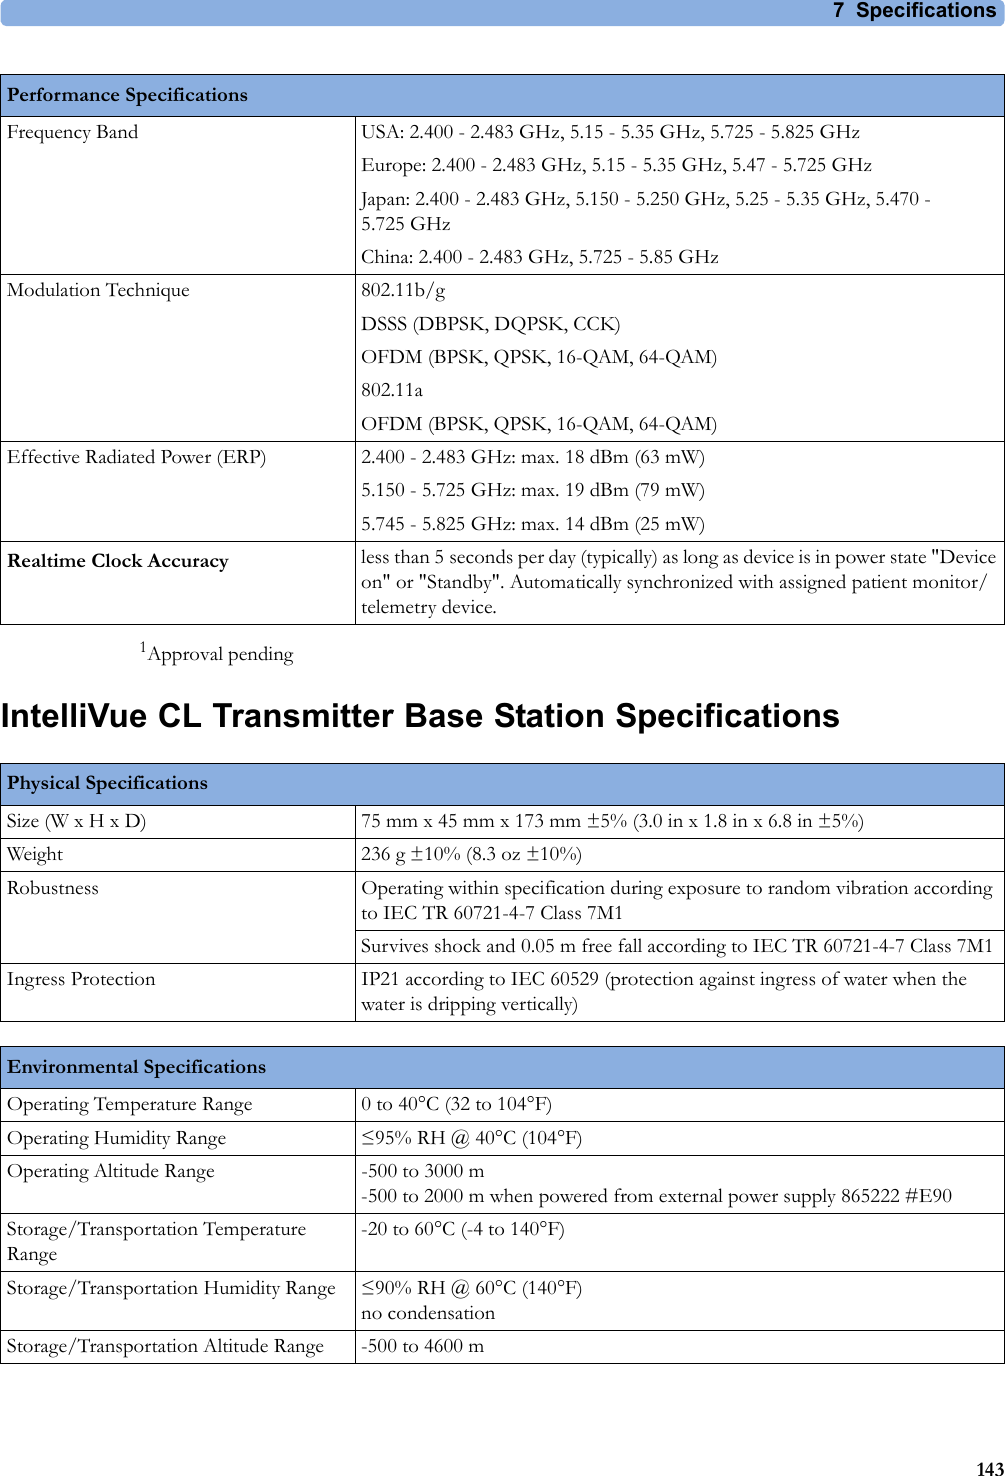 7 Specifications1431Approval pendingIntelliVue CL Transmitter Base Station SpecificationsFrequency Band USA: 2.400 - 2.483 GHz, 5.15 - 5.35 GHz, 5.725 - 5.825 GHzEurope: 2.400 - 2.483 GHz, 5.15 - 5.35 GHz, 5.47 - 5.725 GHzJapan: 2.400 - 2.483 GHz, 5.150 - 5.250 GHz, 5.25 - 5.35 GHz, 5.470 - 5.725 GHzChina: 2.400 - 2.483 GHz, 5.725 - 5.85 GHzModulation Technique 802.11b/gDSSS (DBPSK, DQPSK, CCK)OFDM (BPSK, QPSK, 16-QAM, 64-QAM)802.11aOFDM (BPSK, QPSK, 16-QAM, 64-QAM)Effective Radiated Power (ERP) 2.400 - 2.483 GHz: max. 18 dBm (63 mW)5.150 - 5.725 GHz: max. 19 dBm (79 mW)5.745 - 5.825 GHz: max. 14 dBm (25 mW)Realtime Clock Accuracy less than 5 seconds per day (typically) as long as device is in power state &quot;Device on&quot; or &quot;Standby&quot;. Automatically synchronized with assigned patient monitor/telemetry device.Performance SpecificationsPhysical SpecificationsSize (W x H x D) 75 mm x 45 mm x 173 mm ±5% (3.0 in x 1.8 in x 6.8 in ±5%)Weight 236 g ±10% (8.3 oz ±10%)Robustness Operating within specification during exposure to random vibration according to IEC TR 60721-4-7 Class 7M1Survives shock and 0.05 m free fall according to IEC TR 60721-4-7 Class 7M1Ingress Protection IP21 according to IEC 60529 (protection against ingress of water when the water is dripping vertically)Environmental SpecificationsOperating Temperature Range 0 to 40°C (32 to 104°F)Operating Humidity Range ≤95% RH @ 40°C (104°F)Operating Altitude Range -500 to 3000 m-500 to 2000 m when powered from external power supply 865222 #E90Storage/Transportation Temperature Range-20 to 60°C (-4 to 140°F)Storage/Transportation Humidity Range ≤90% RH @ 60°C (140°F)no condensationStorage/Transportation Altitude Range -500 to 4600 m